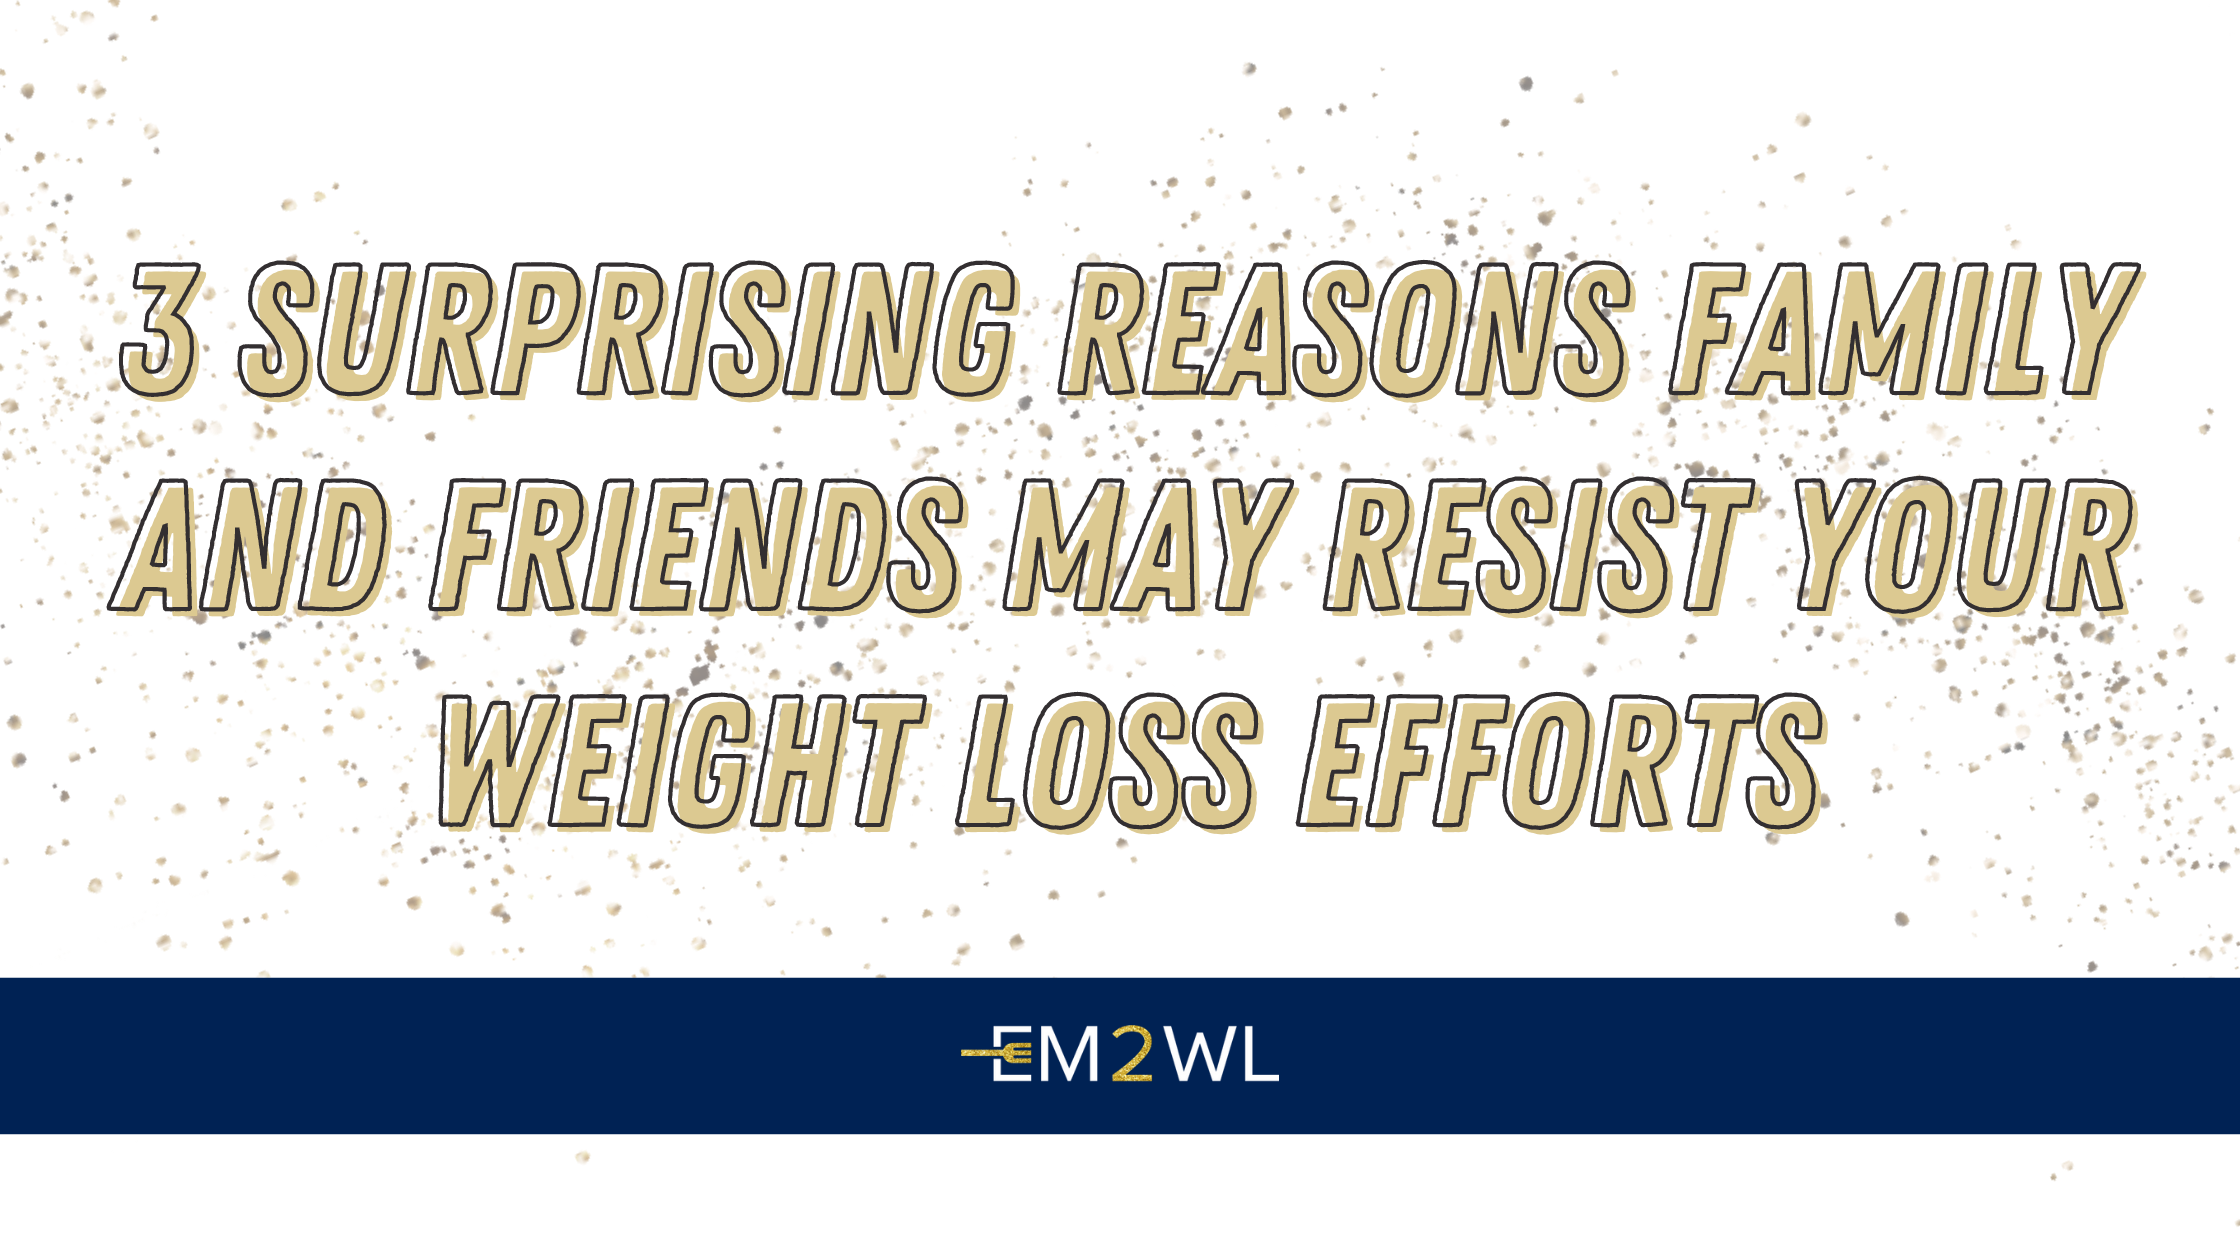 3 Surprising Reasons Family And Friends May Resist Your Weight Loss Efforts